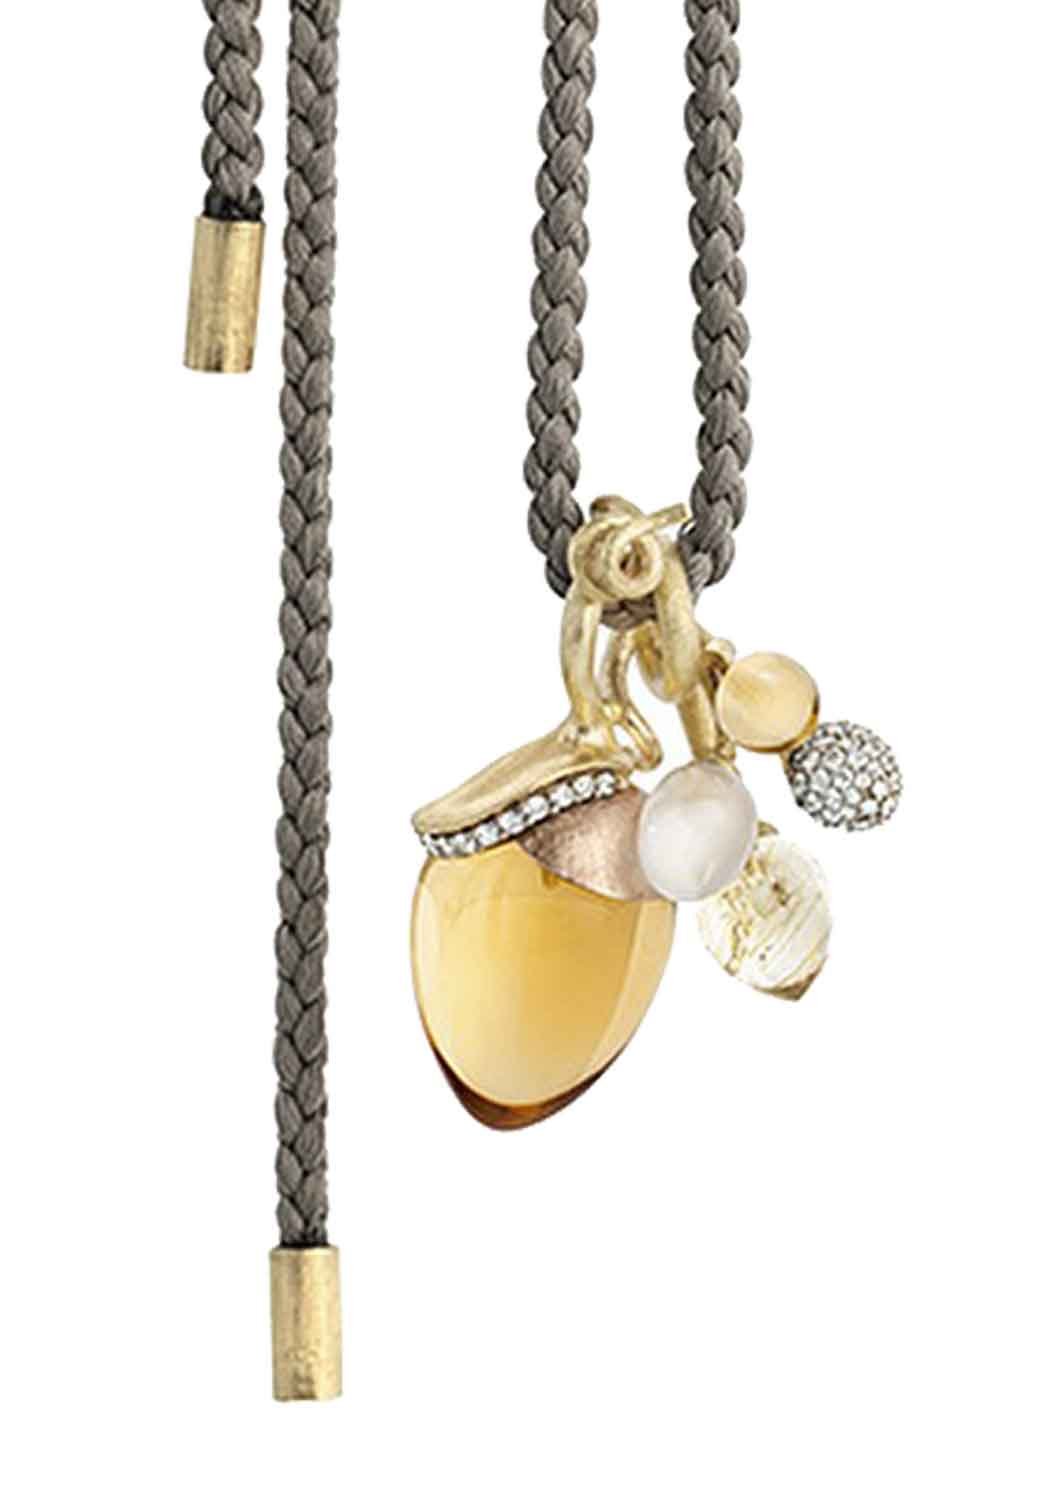 Ole Lynggaard Design String with Pendants and Charms (Sold Separately) | OsterJewelers.com